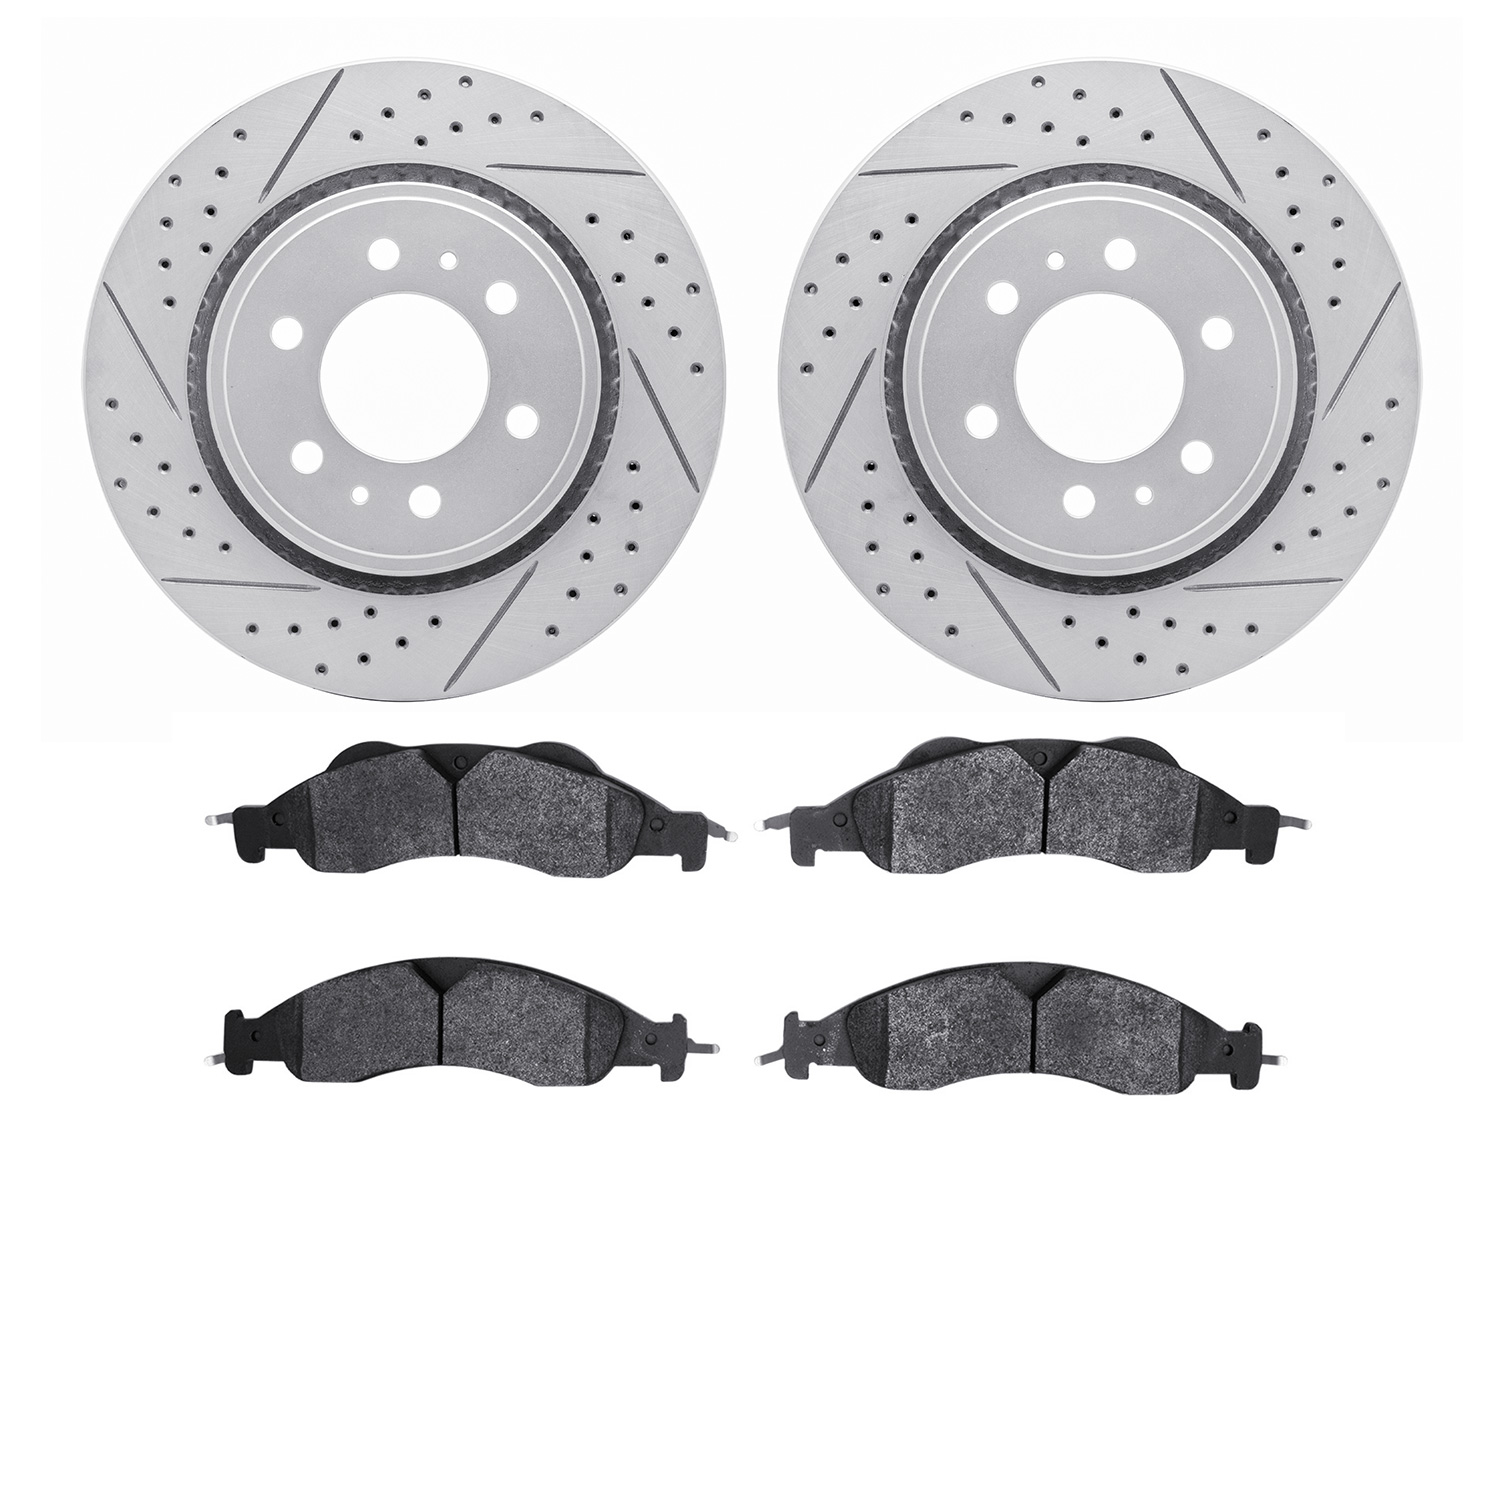 2502-54191 Geoperformance Drilled/Slotted Rotors w/5000 Advanced Brake Pads Kit, 2007-2009 Ford/Lincoln/Mercury/Mazda, Position: